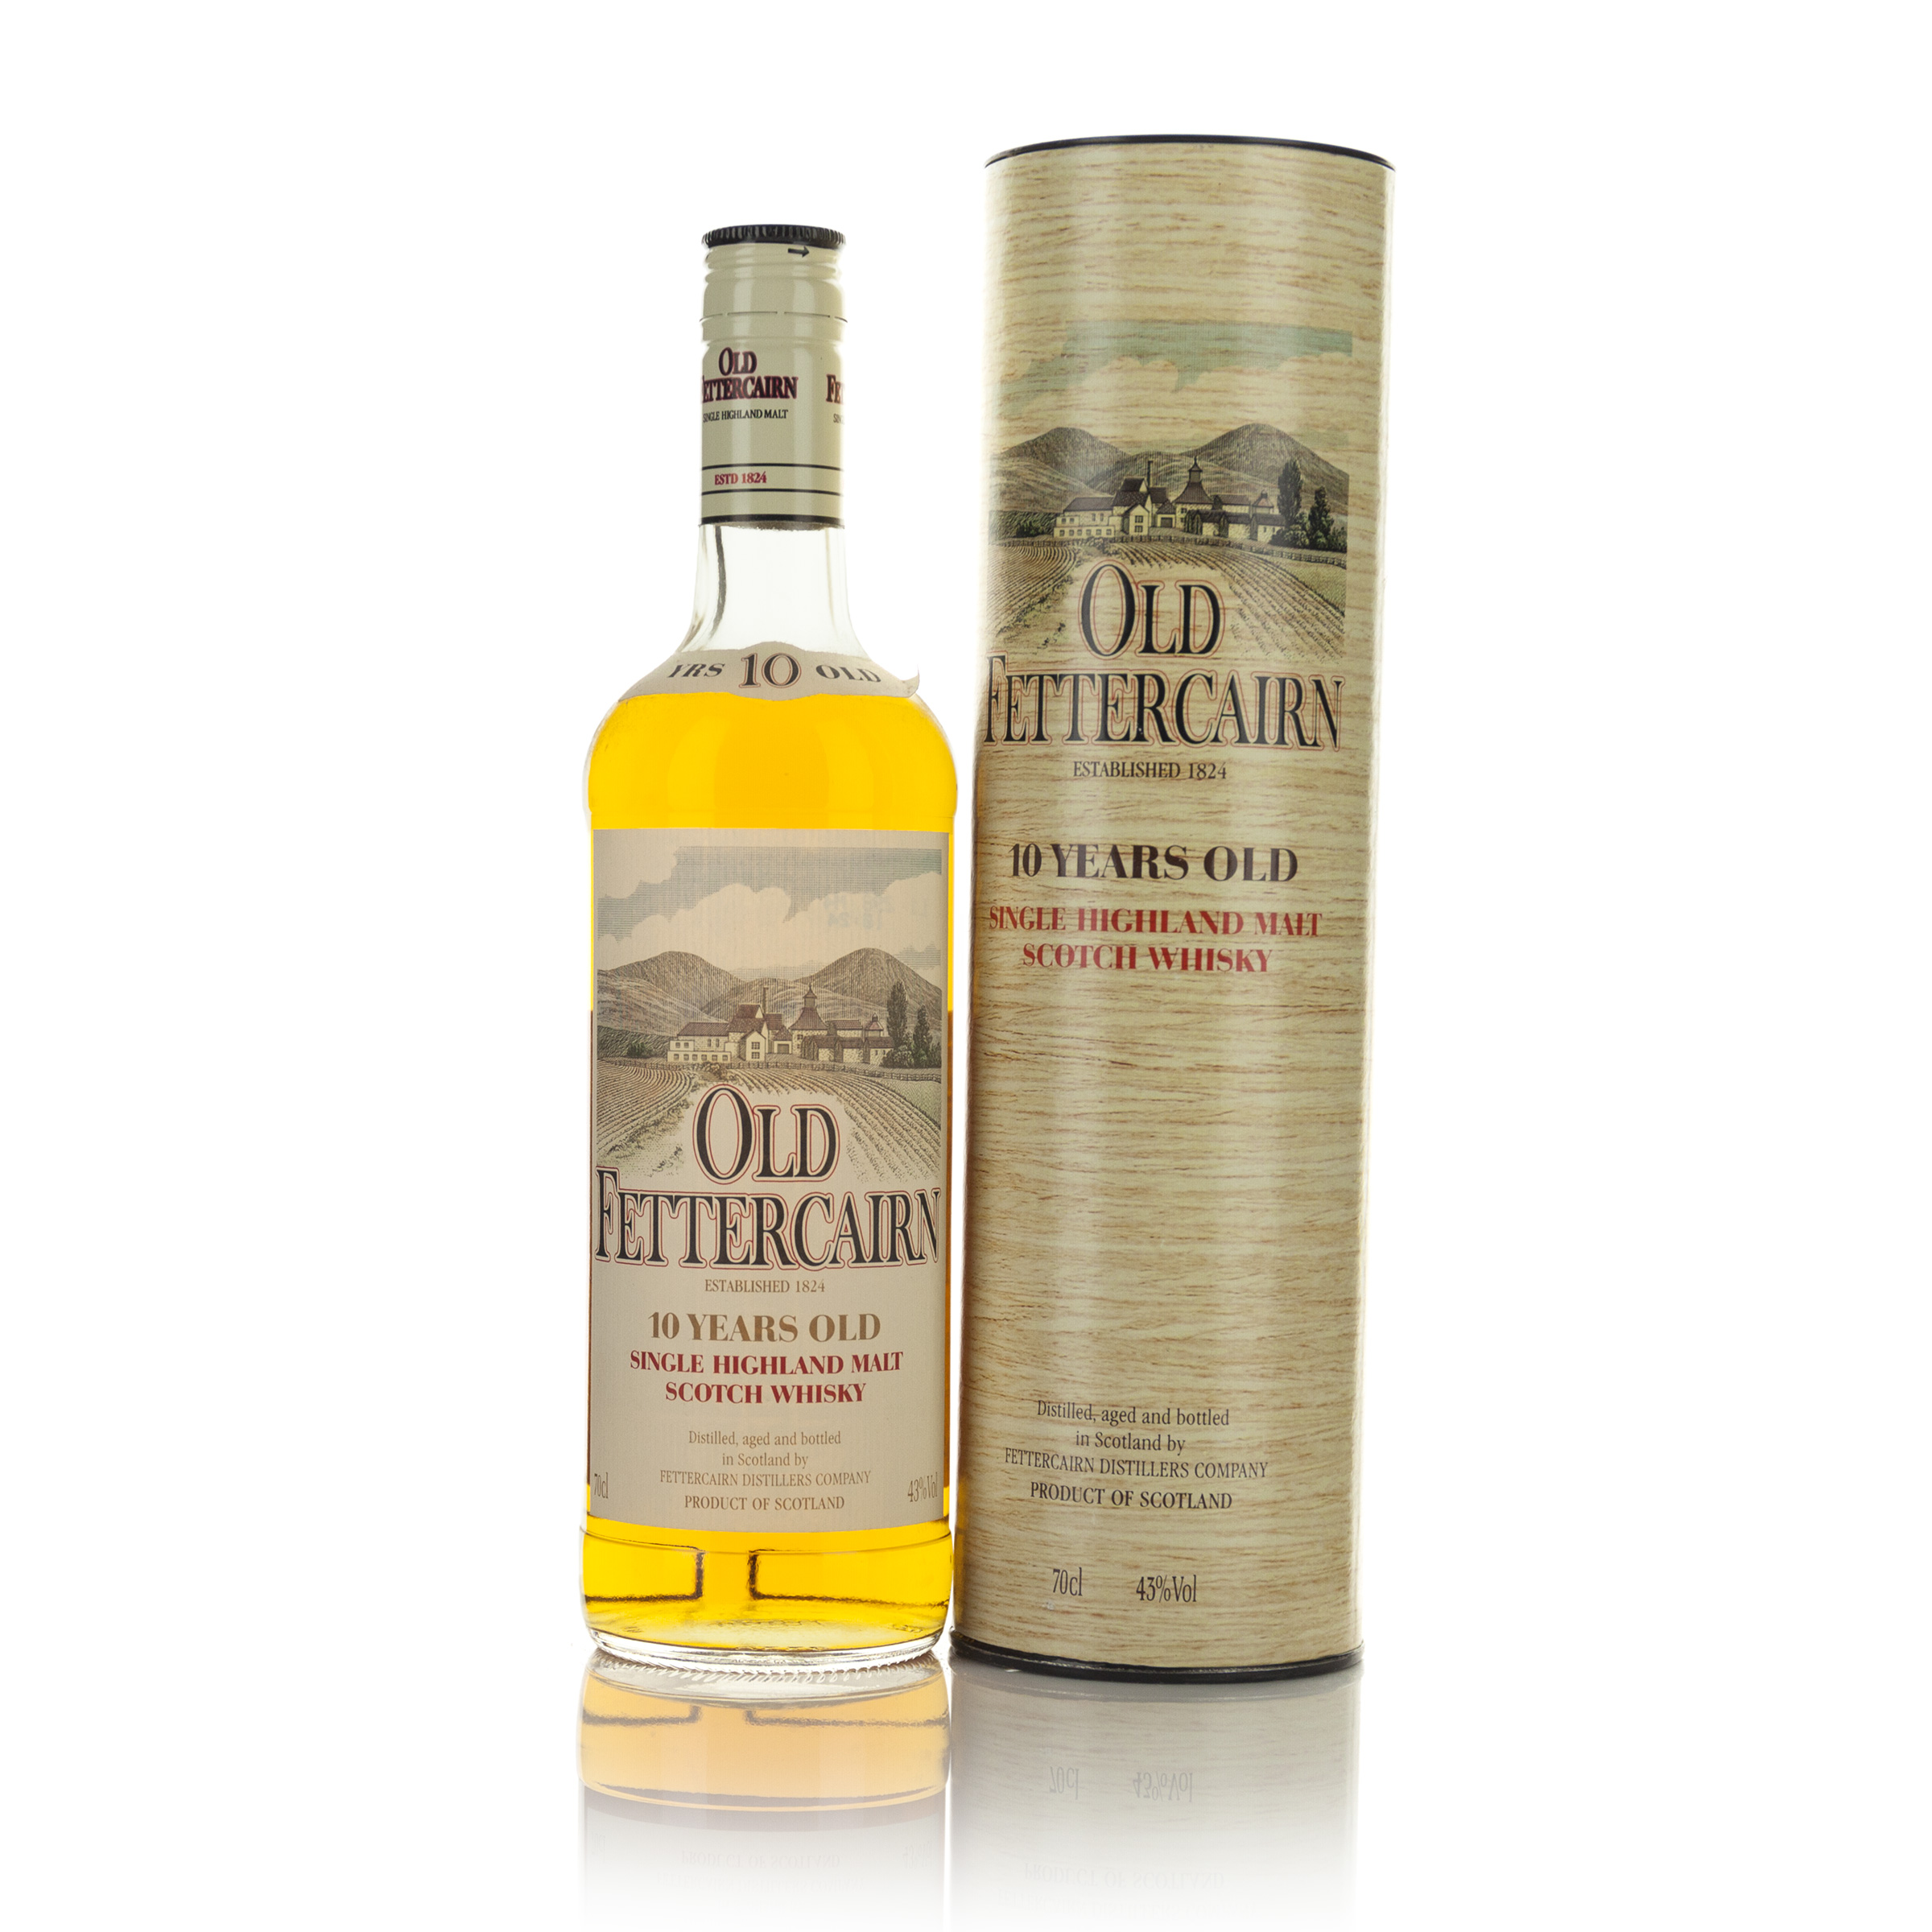 OLD FETTERCAIRN SINGLE HIGHLAND SCOTCH WHISKY 10 YEARS (ONE 70 CL)